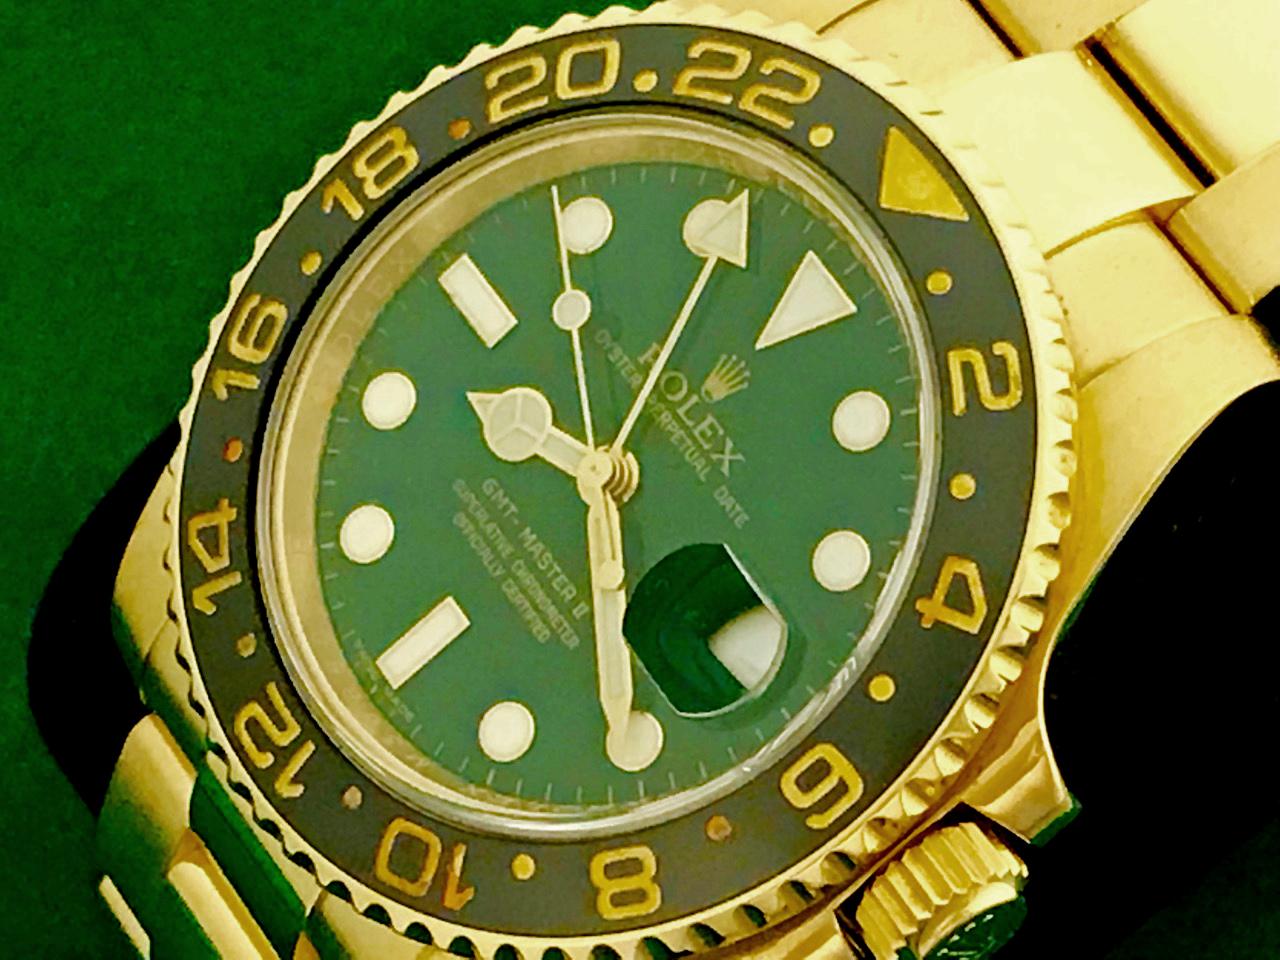 Rolex Men's GMT-Master II Anniversary Model 116718LN at a great price.  Automatic Winding Oyster Perpetual with Date Movement.  Featuring a stunning green dial with luminous markers,  18k yellow gold case with rotating bezel and black ceramic bezel,